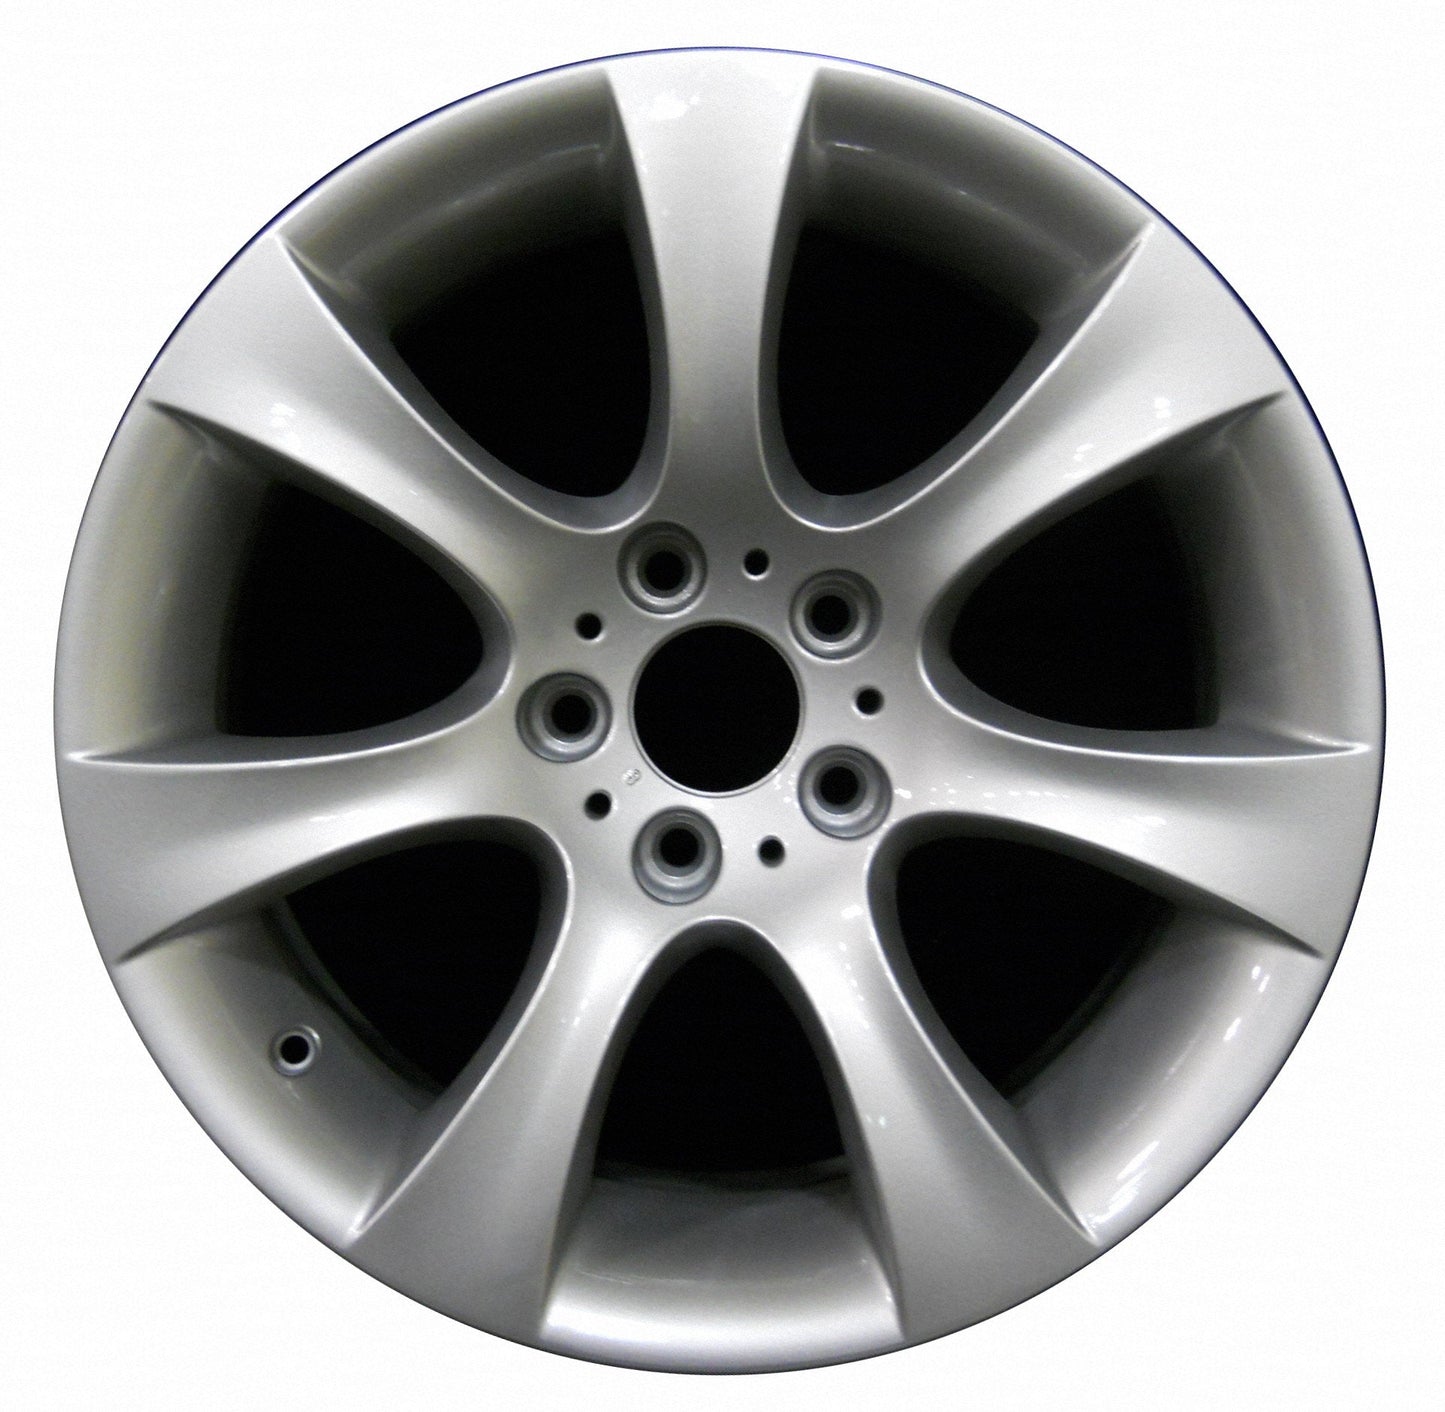 BMW 528i  2008, 2009, 2010 Factory OEM Car Wheel Size 18x8 Alloy WAO.59475FT.PS06.FF